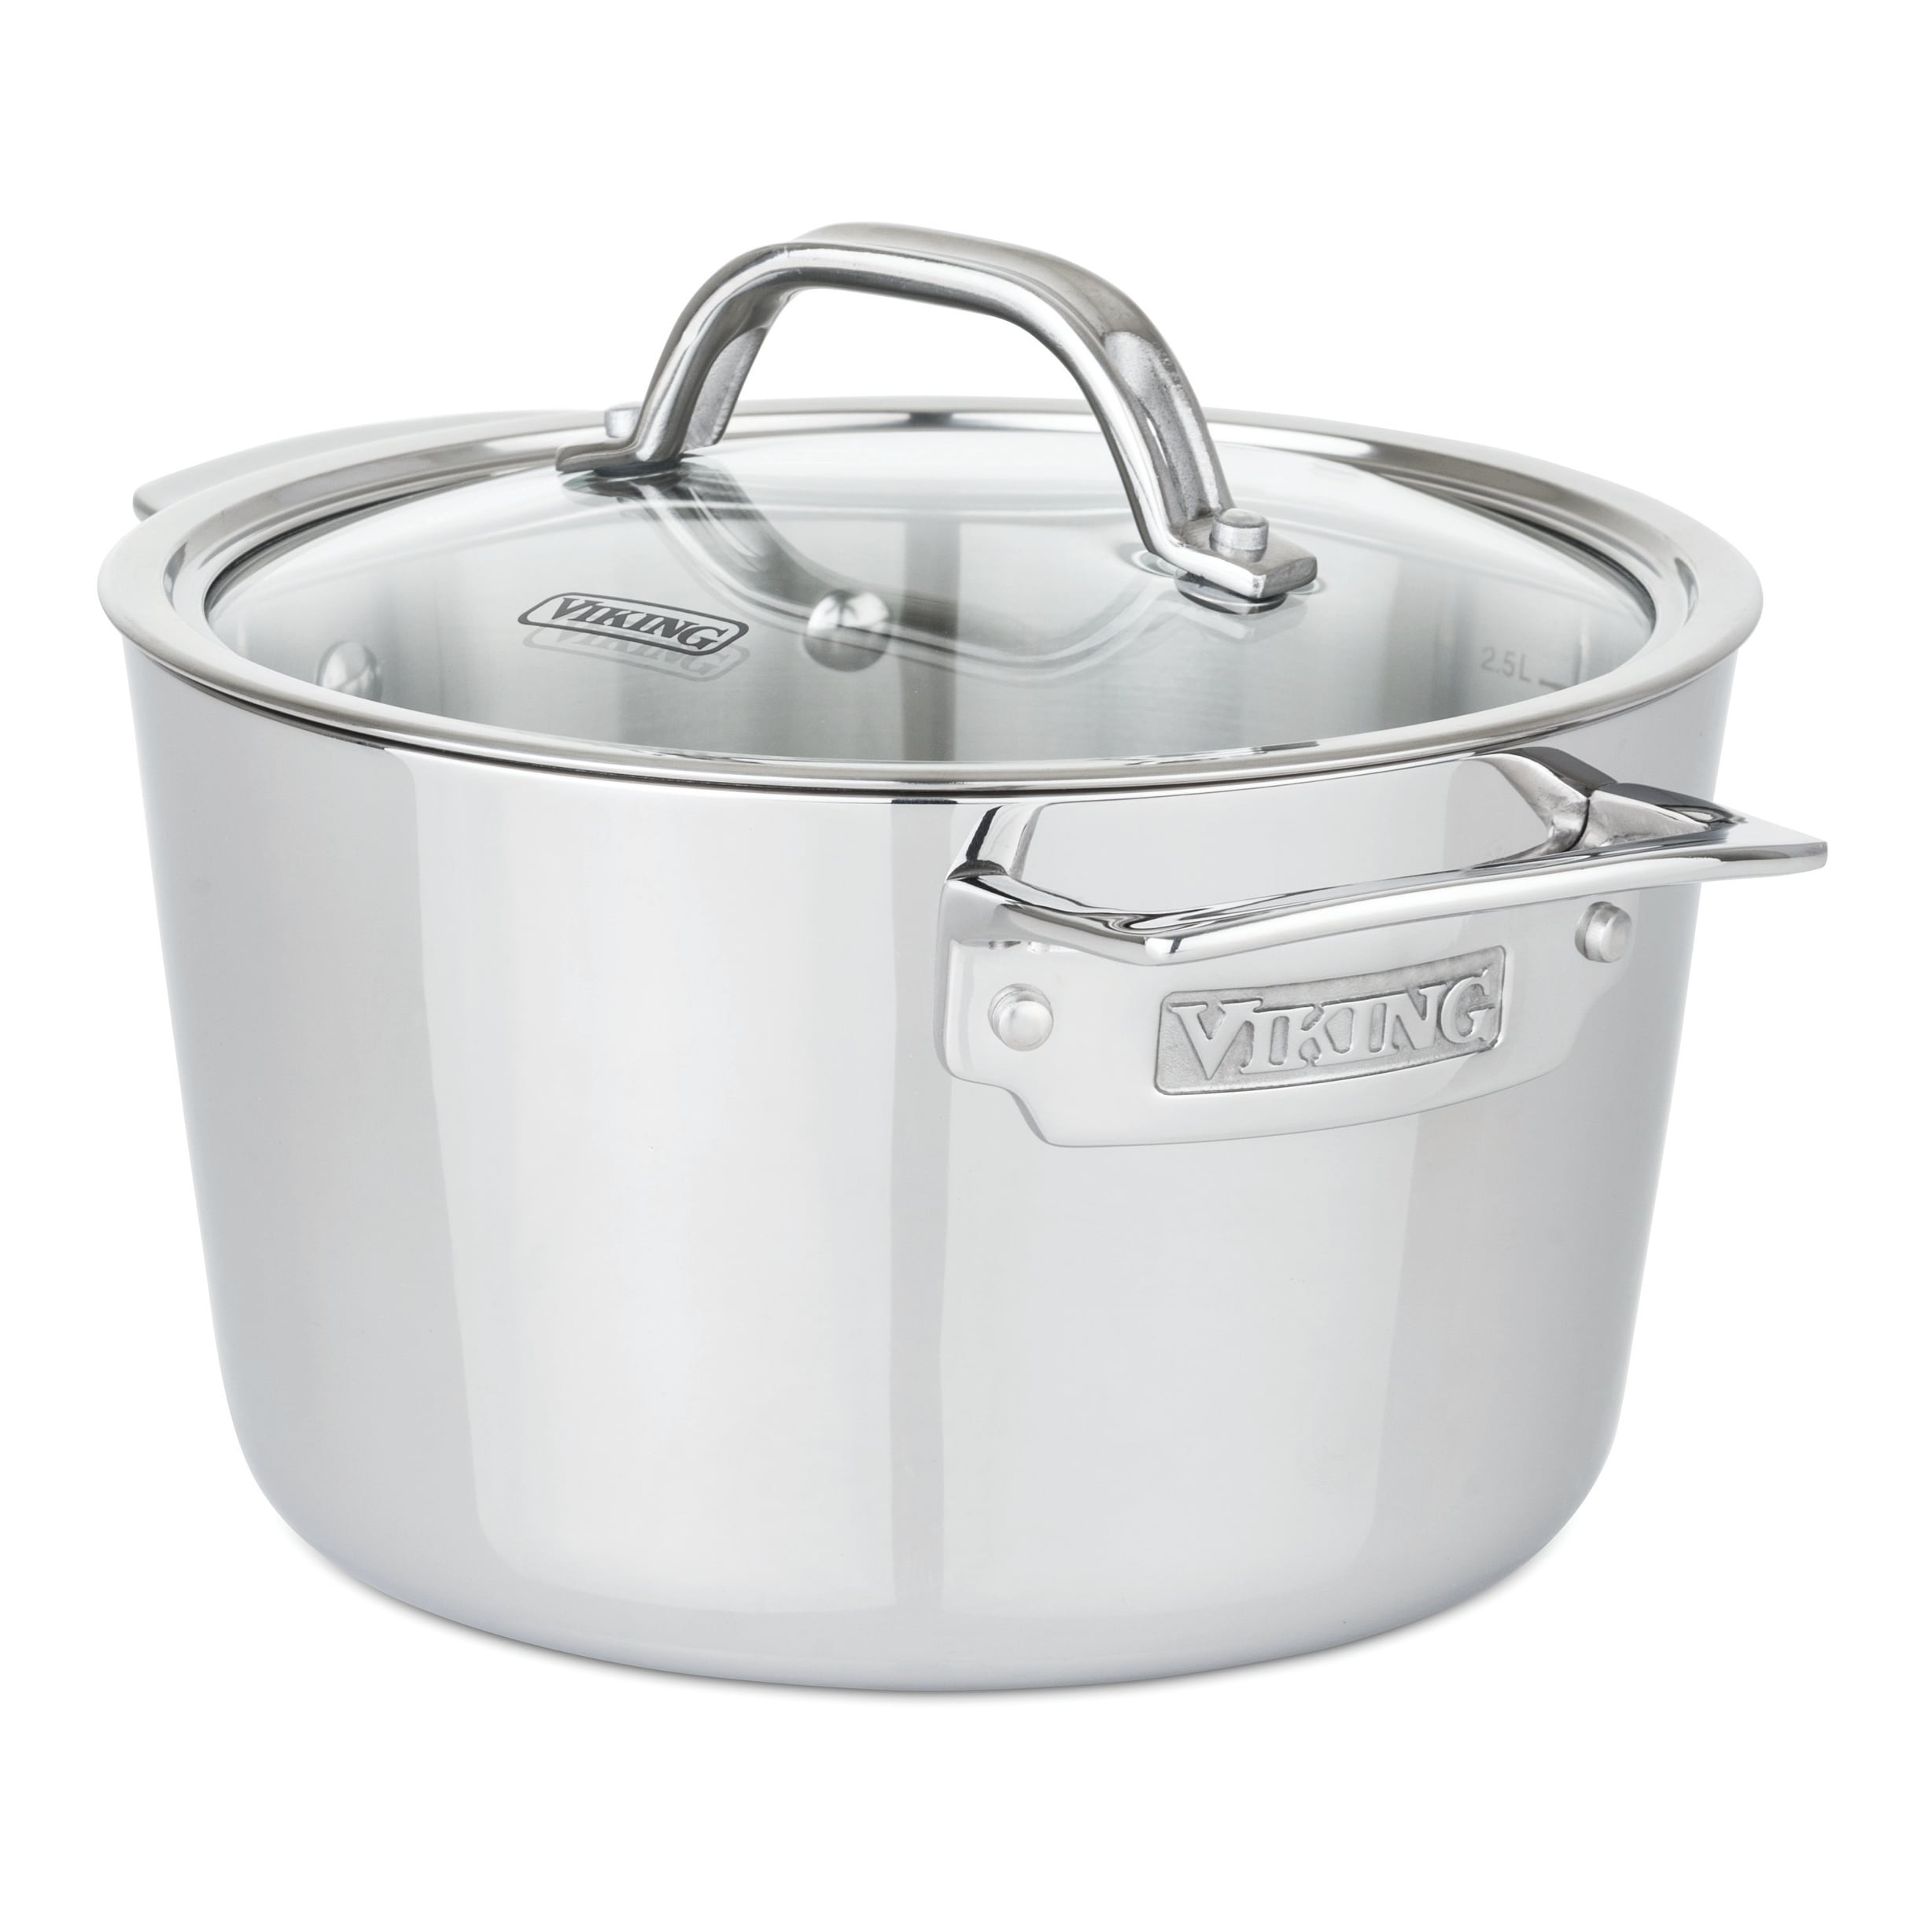 Calphalon 8 Quart Tri-ply Stainless Steel Stock Pot With Lid And